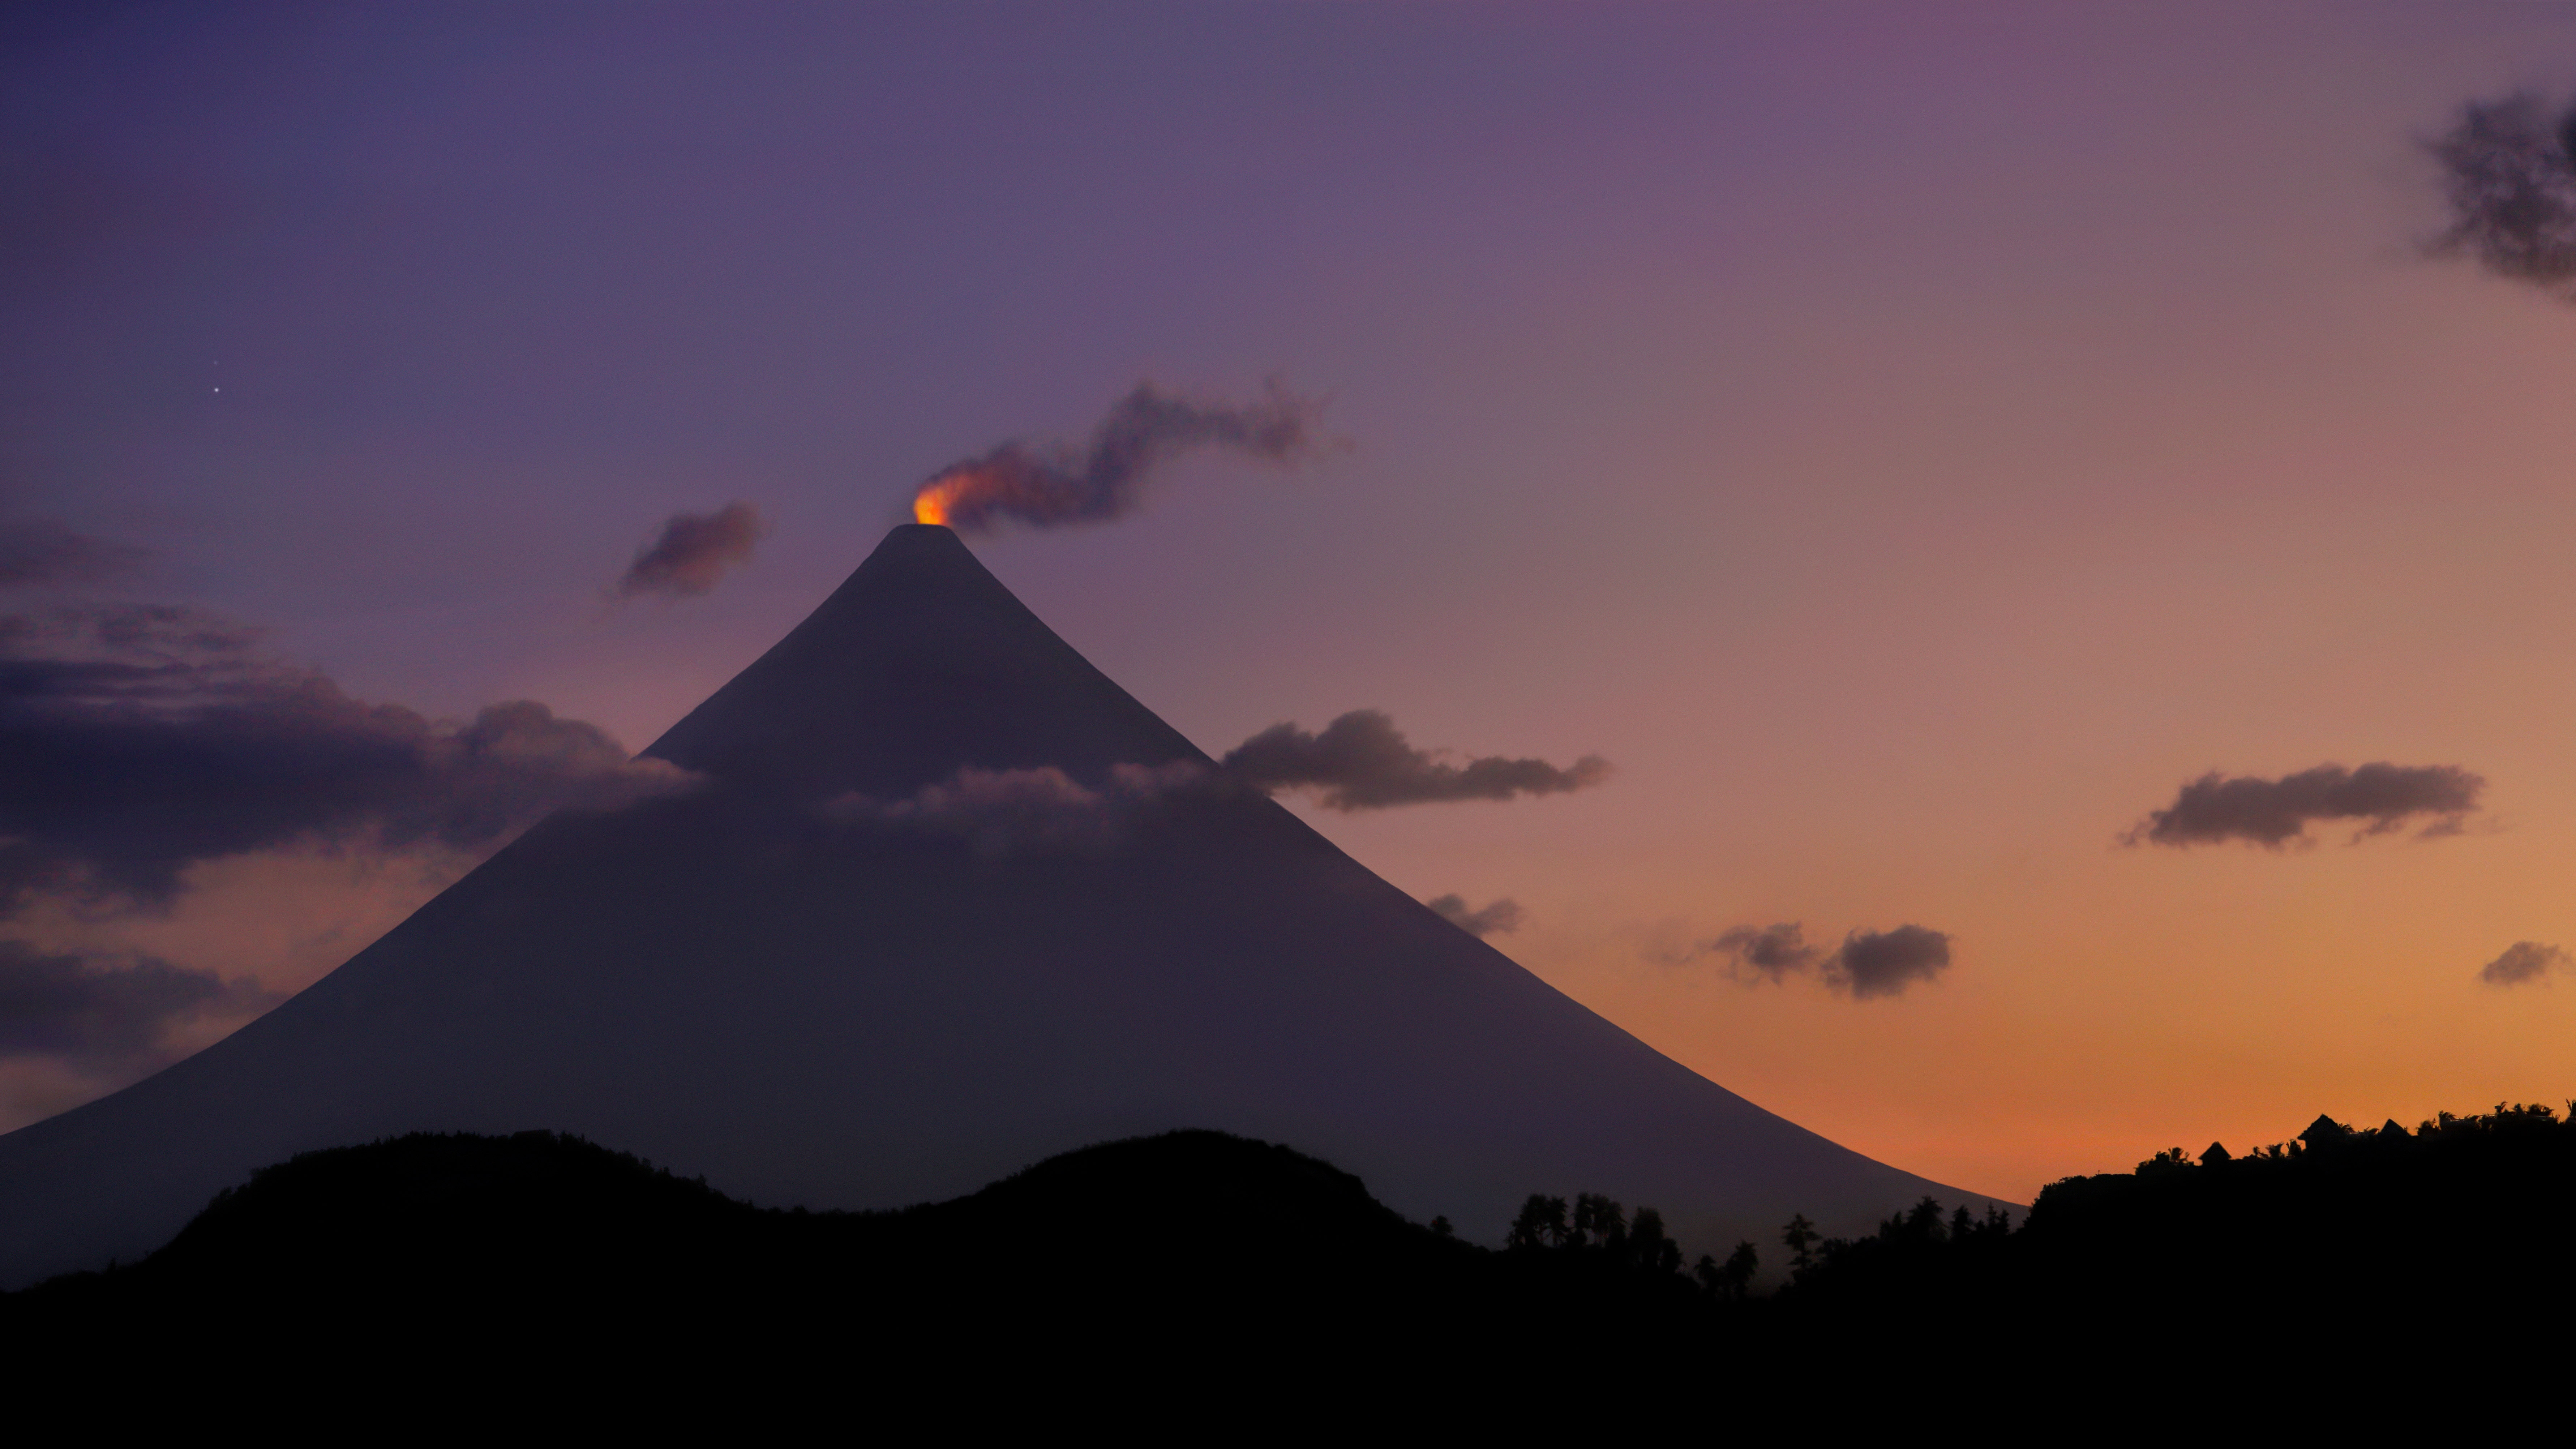 Smoke from the crater of Mount Mayon, Philippines 4k Ultra HD Wallpaper